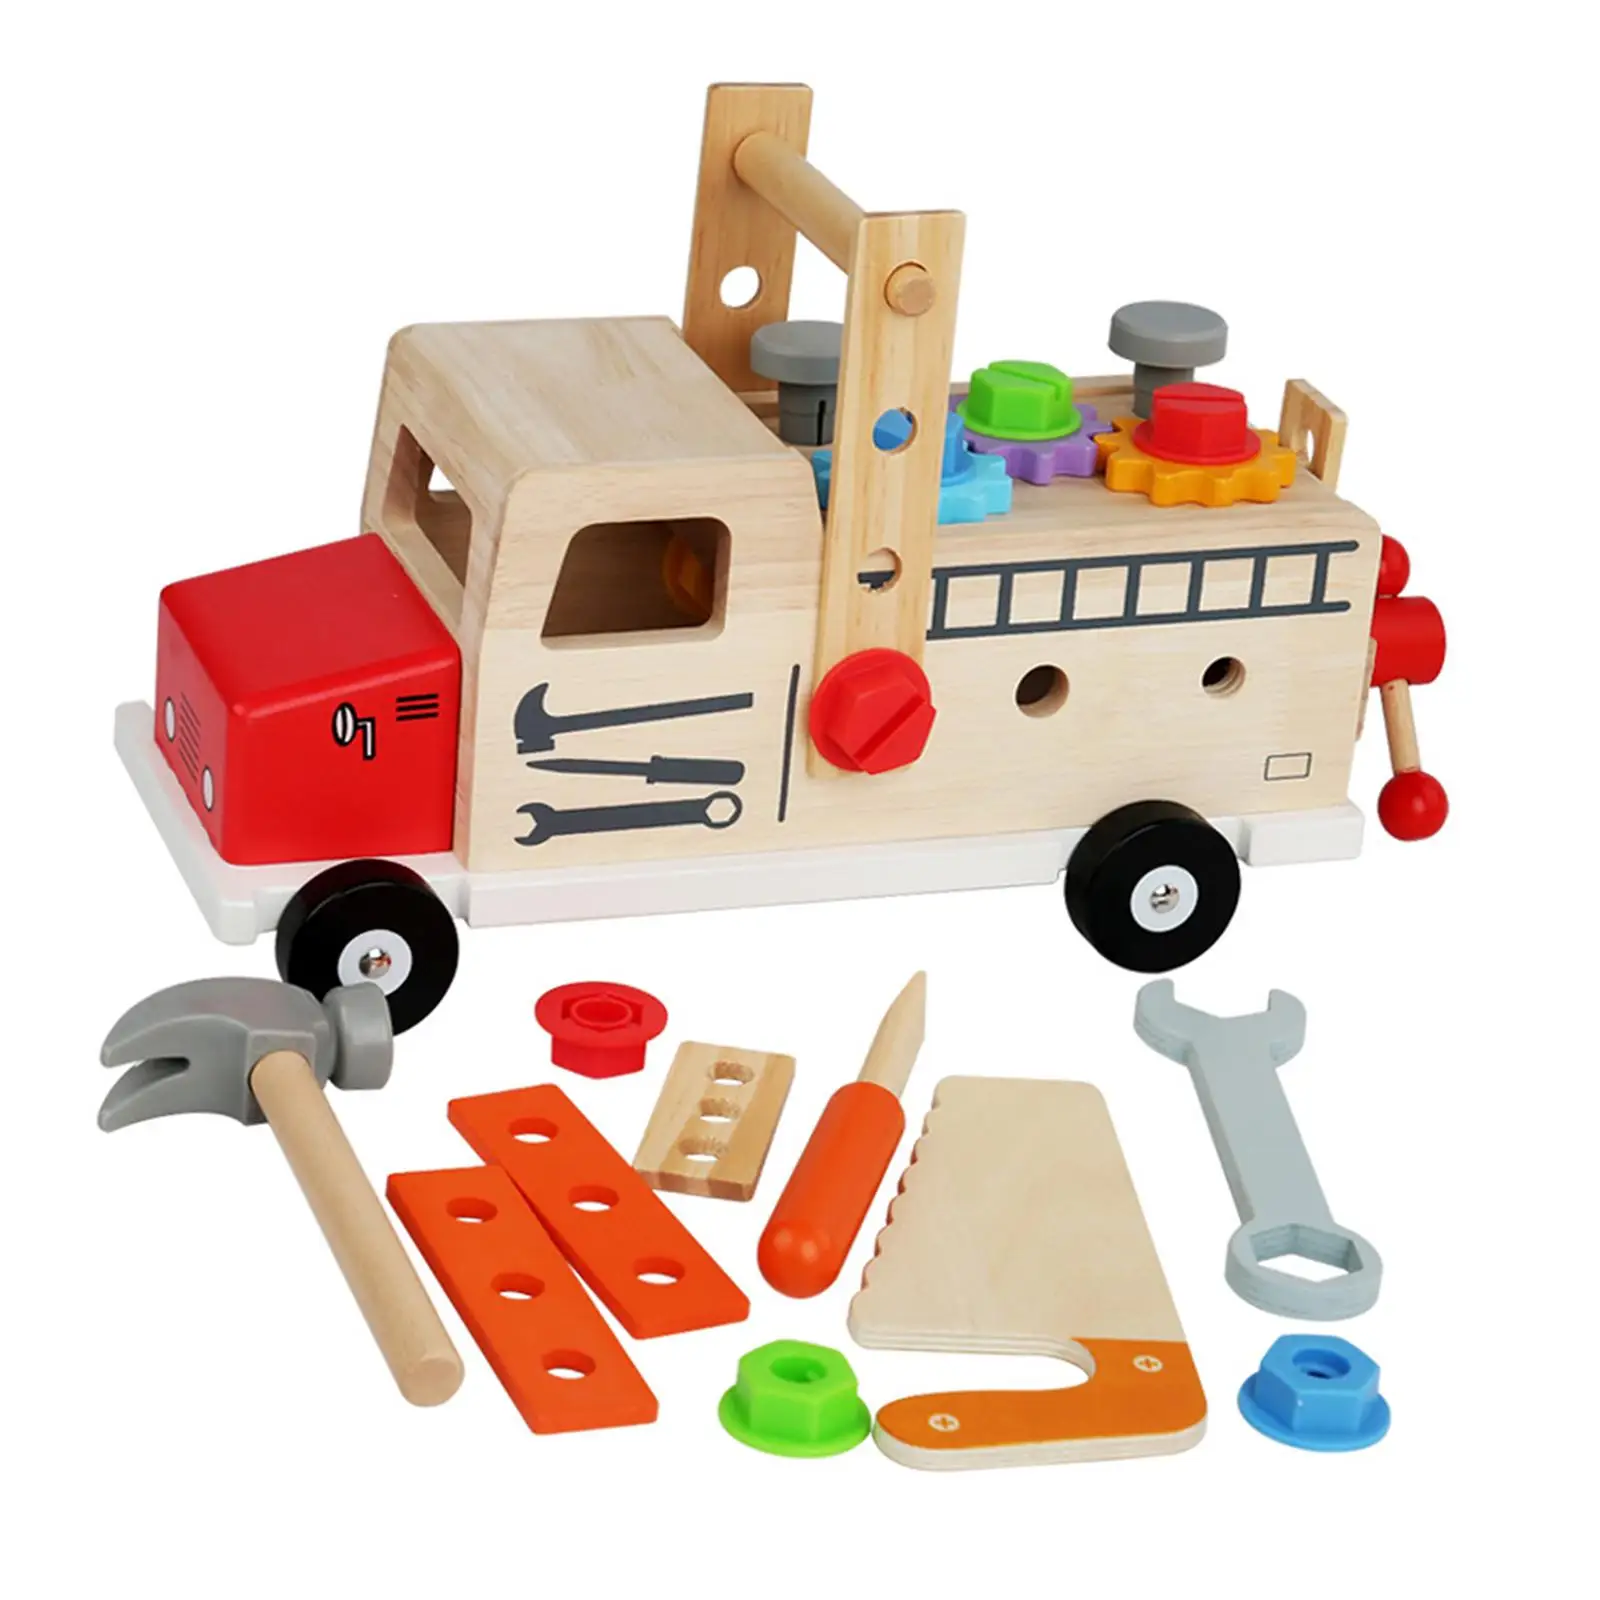 Wood Kids Tool Set Montessori Birthday Gift Construction Toy Tool Set for Toddlers for Age 3+ Children Kids Xmas Present